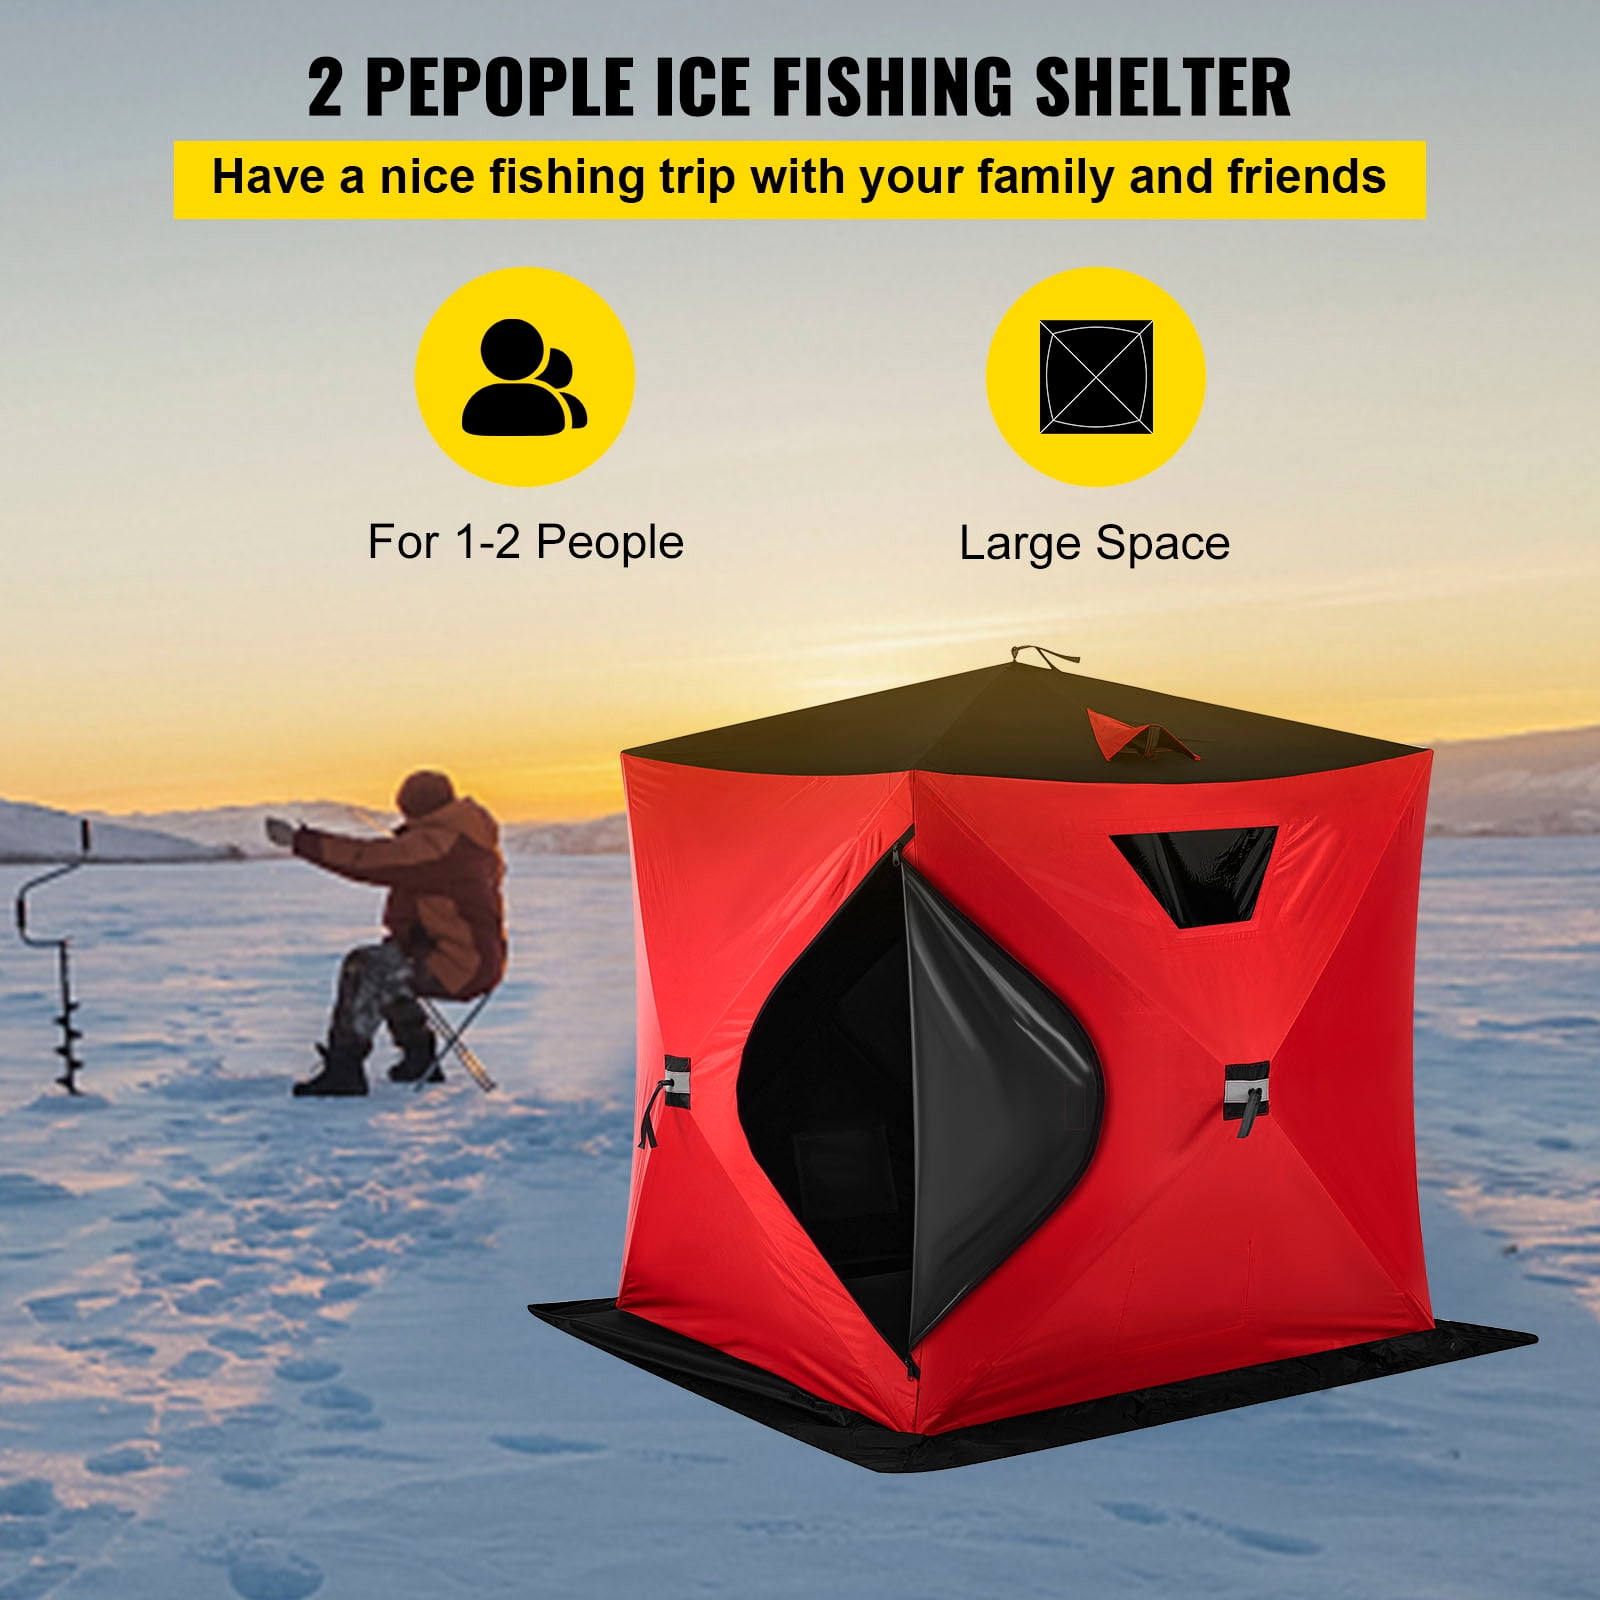 Happybuy Ice Fishing Tent Waterproof Pop-up 2/3/4/8 Person Shanty Window w Carrying Bag Ice Shelter Fishing Tent with Detachable Ventilation Windows Frost Resisting Oxford Fabric Zippered Door 